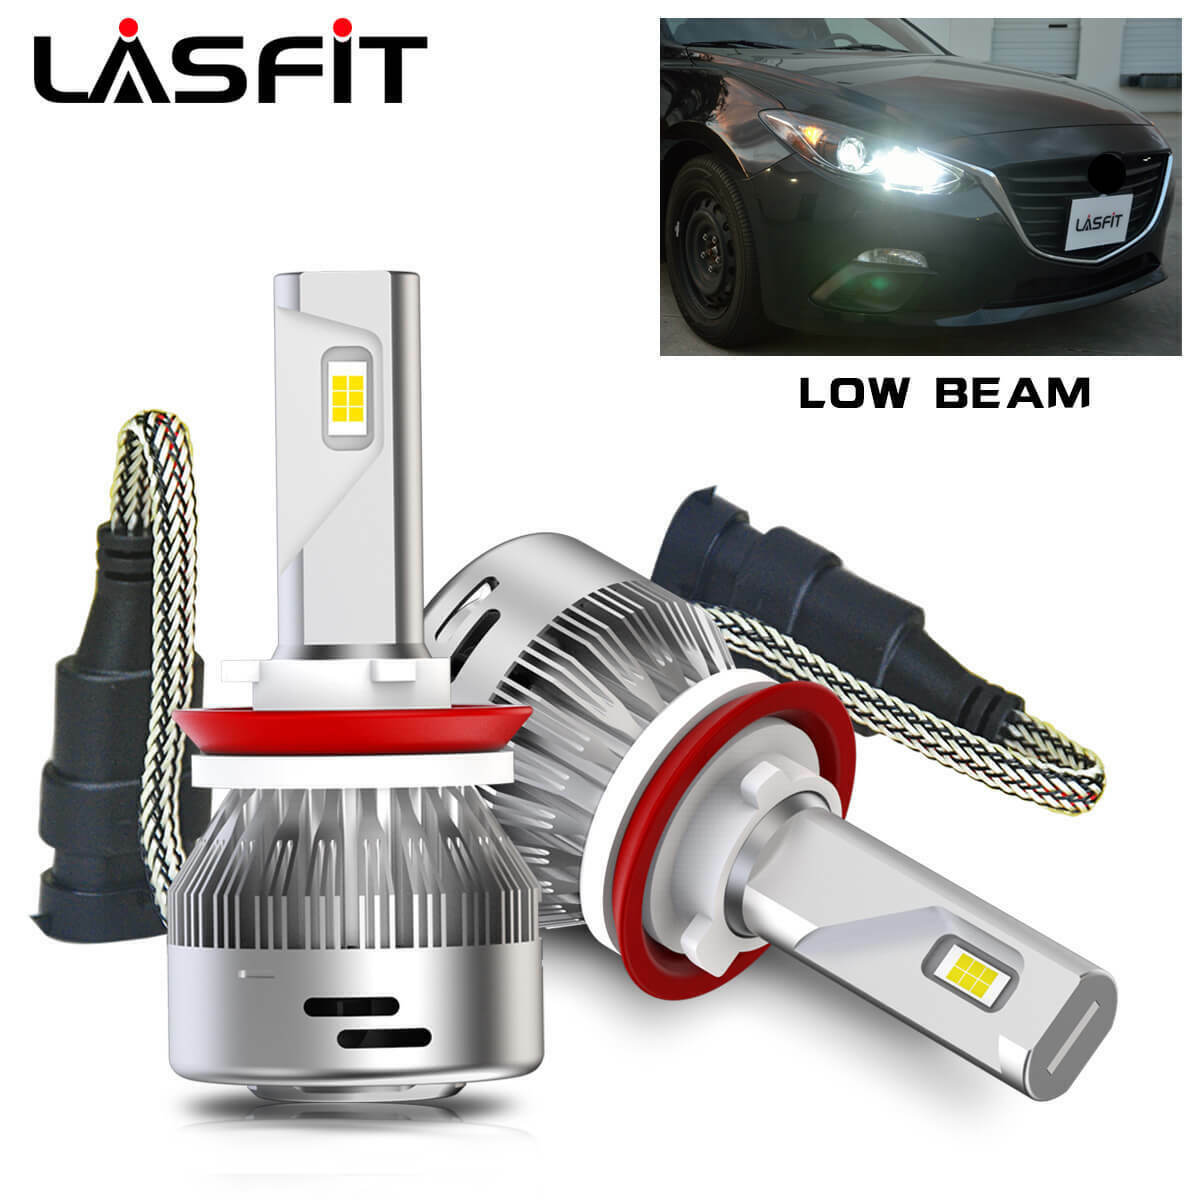 LASFIT H11 LED Headlight Low Beam Bulb for Toyota Camry Tundra Prius Highlander